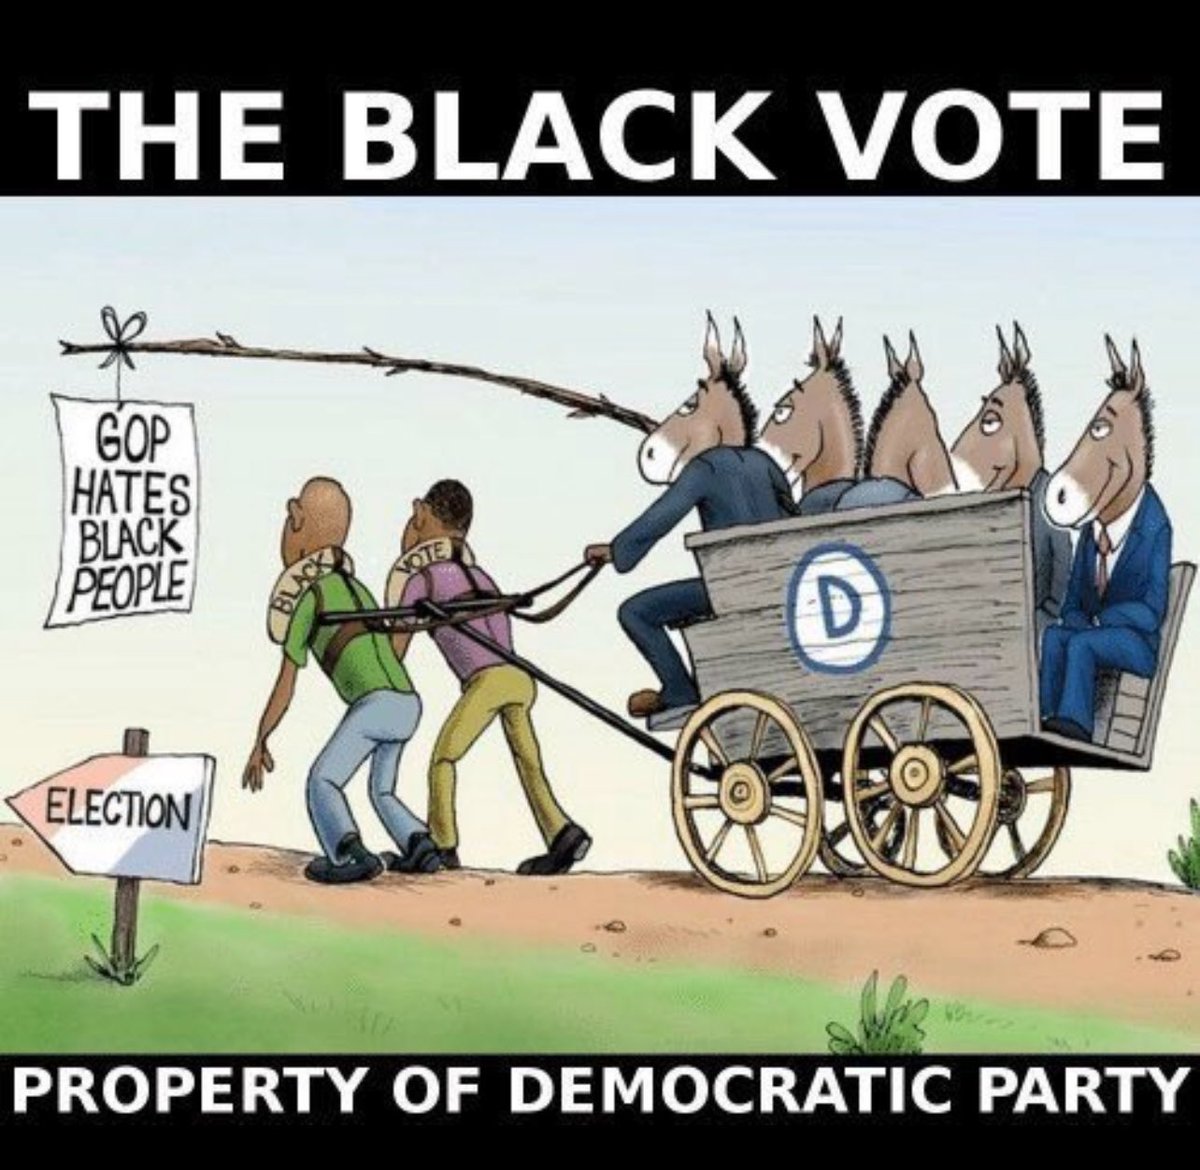 Breaking News!!! The Democrat Party's winning strategy in elections involved high tech Jim Crow techniques, such as Black voter suppression and disenfranchisement. Here is what it looks like and how it's practiced. A picture is worth a thousand votes.